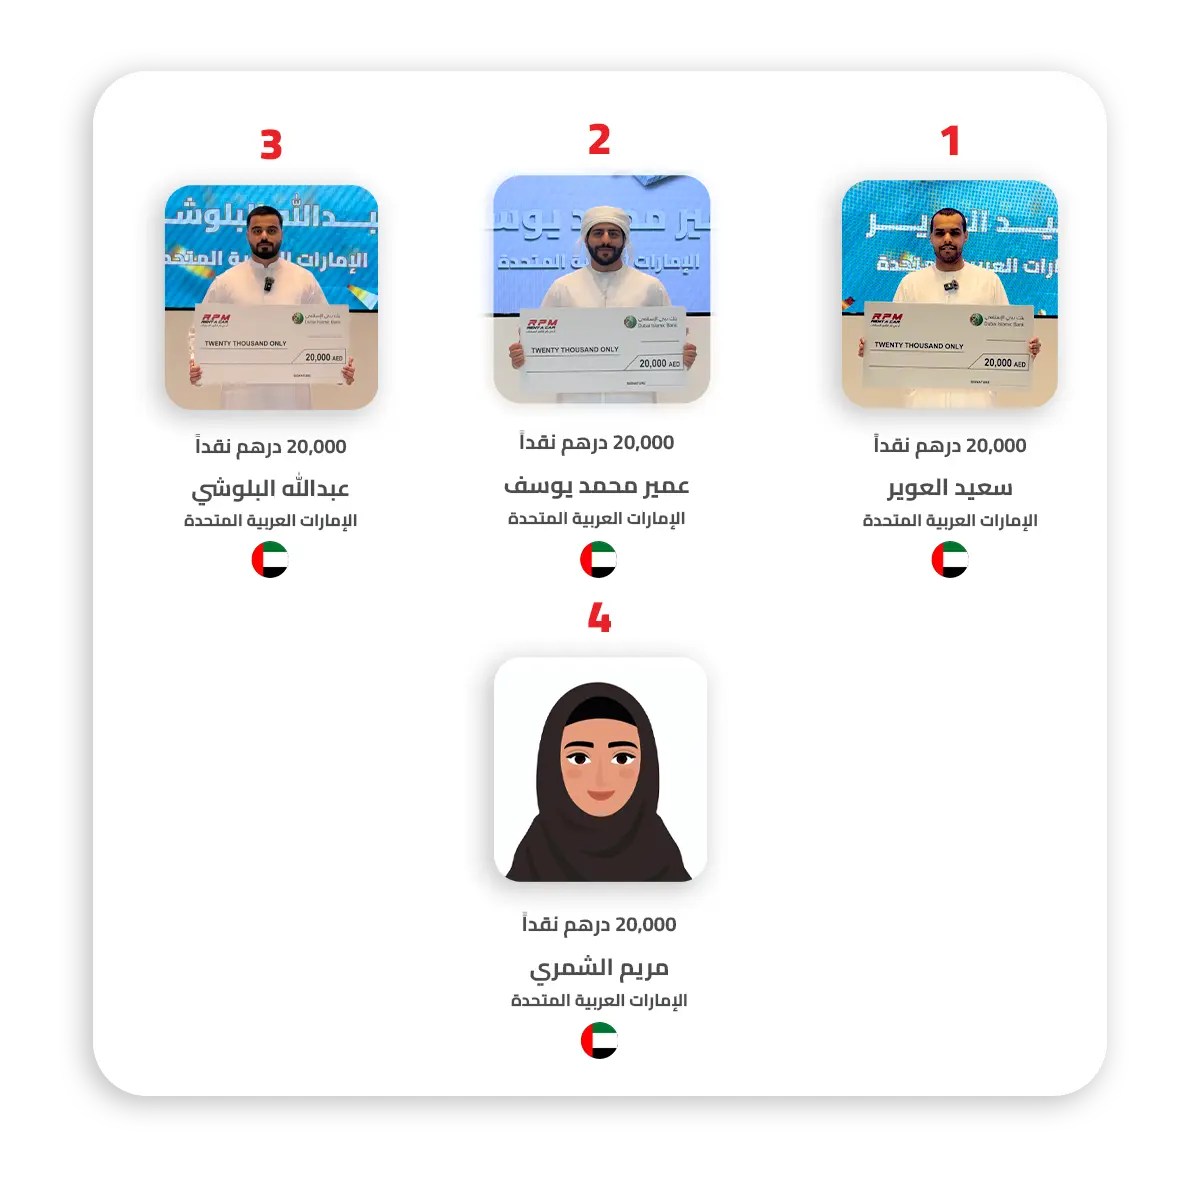 05 Winners From 20,000 AED Cash Arabic